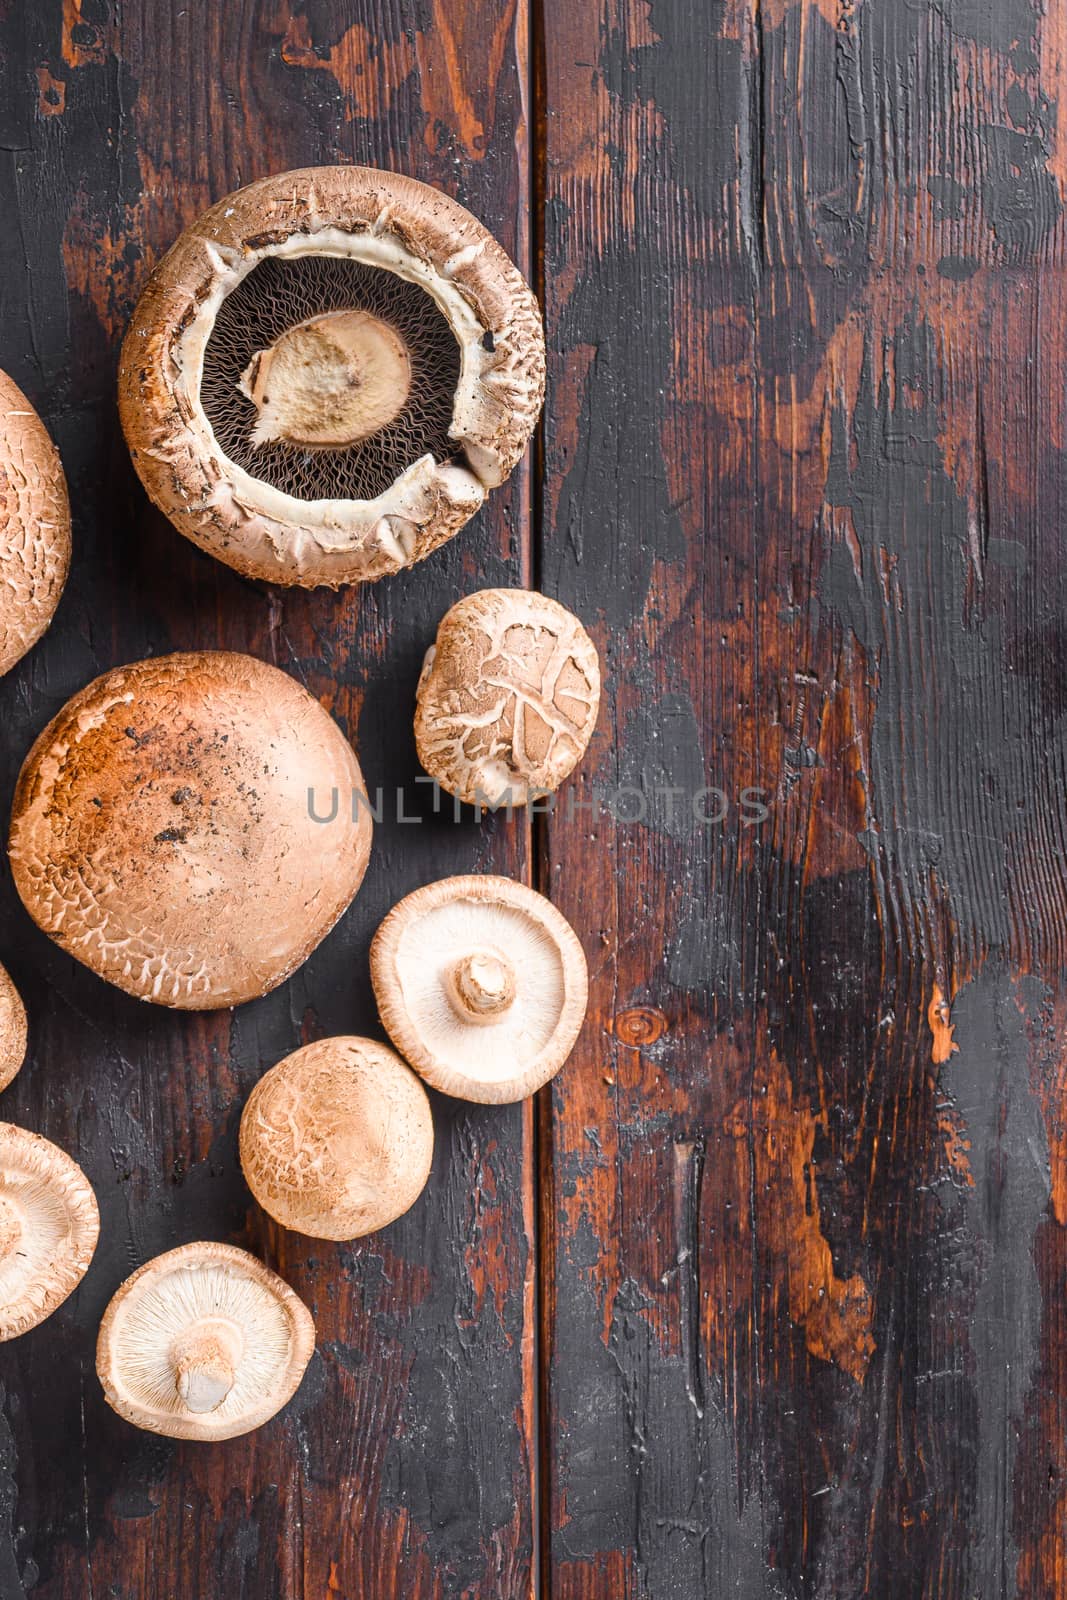 Portobello and shiitake mushrooms set on old wooden table, top view space for text